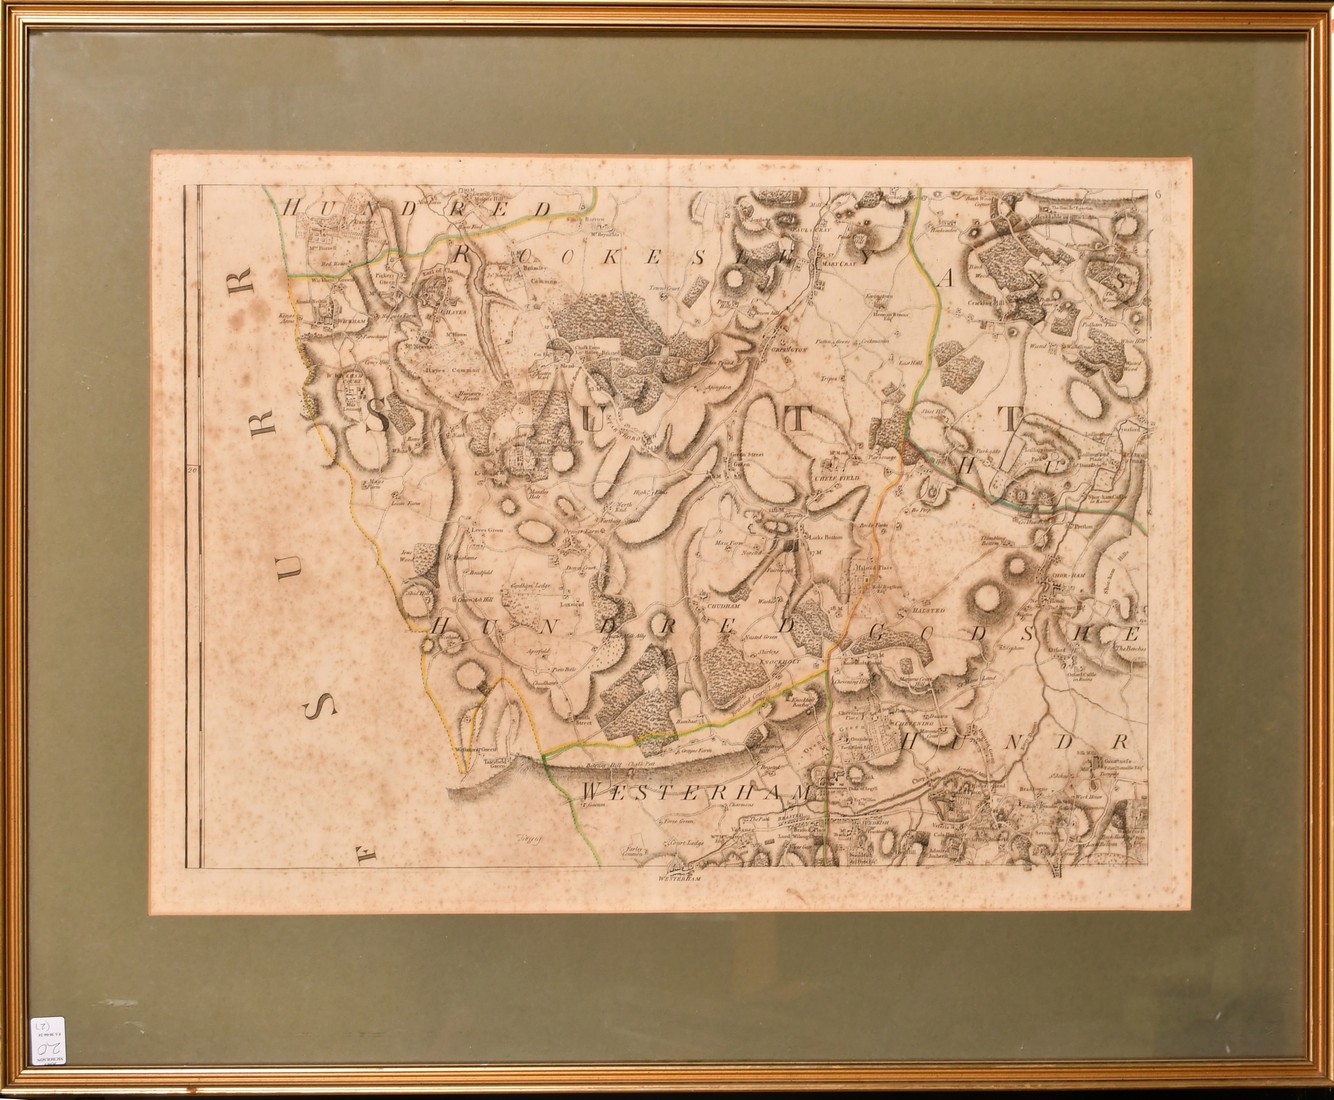 Robert Morden, a map of Kent, etching later hand coloured, 13.75" x 25" (35 x 63.5cm), along with an - Image 4 of 5